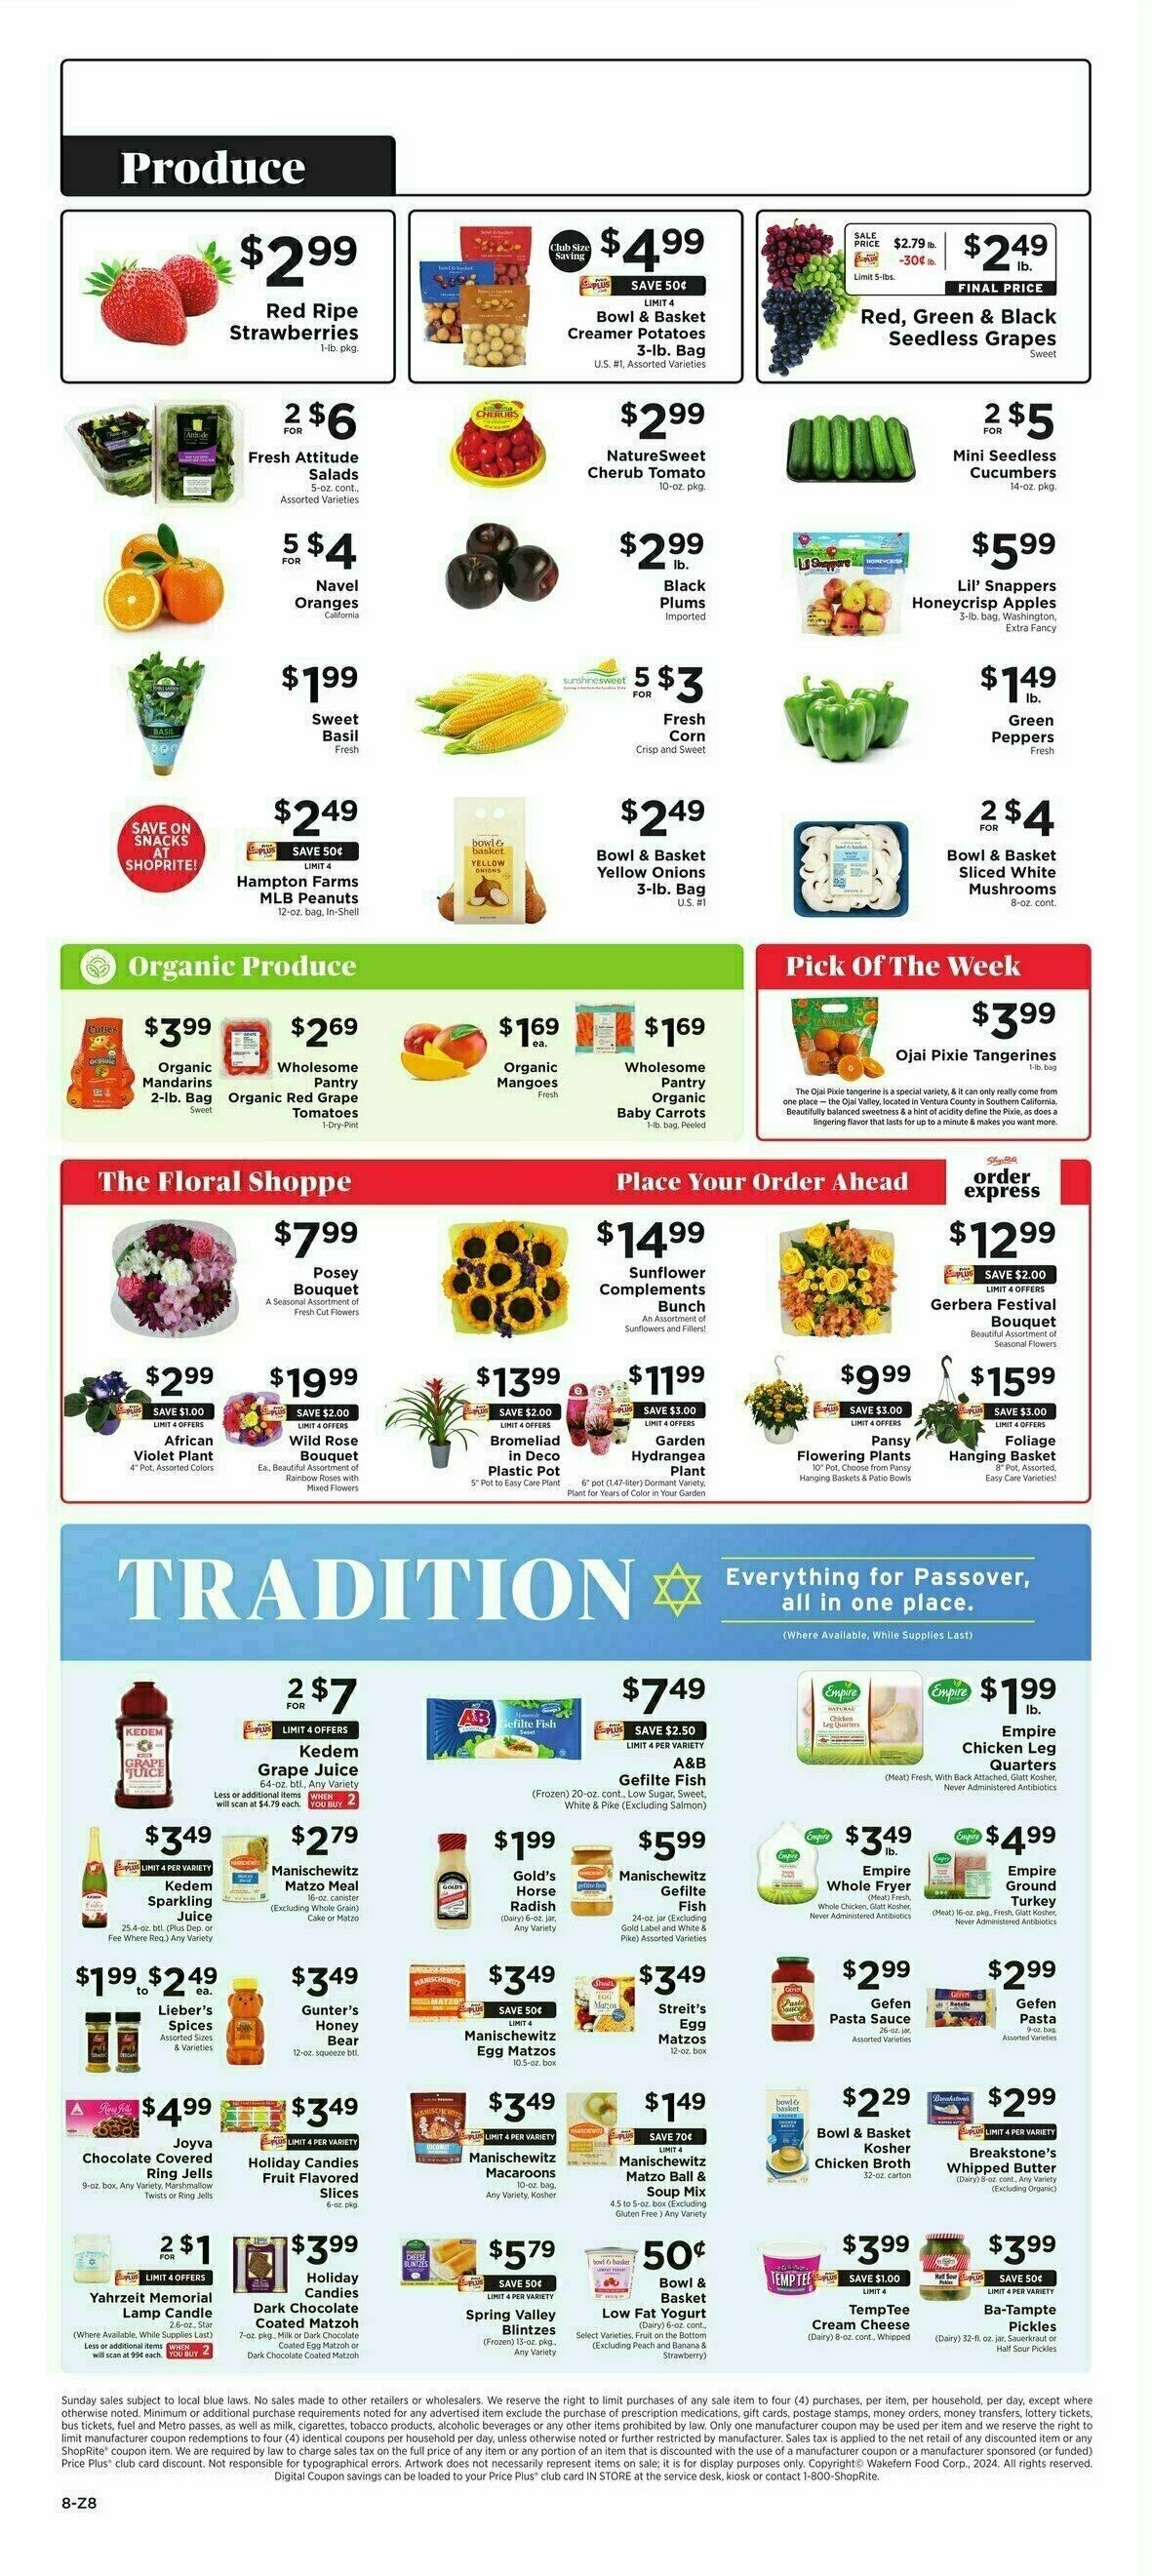 ShopRite Weekly Ad from April 5